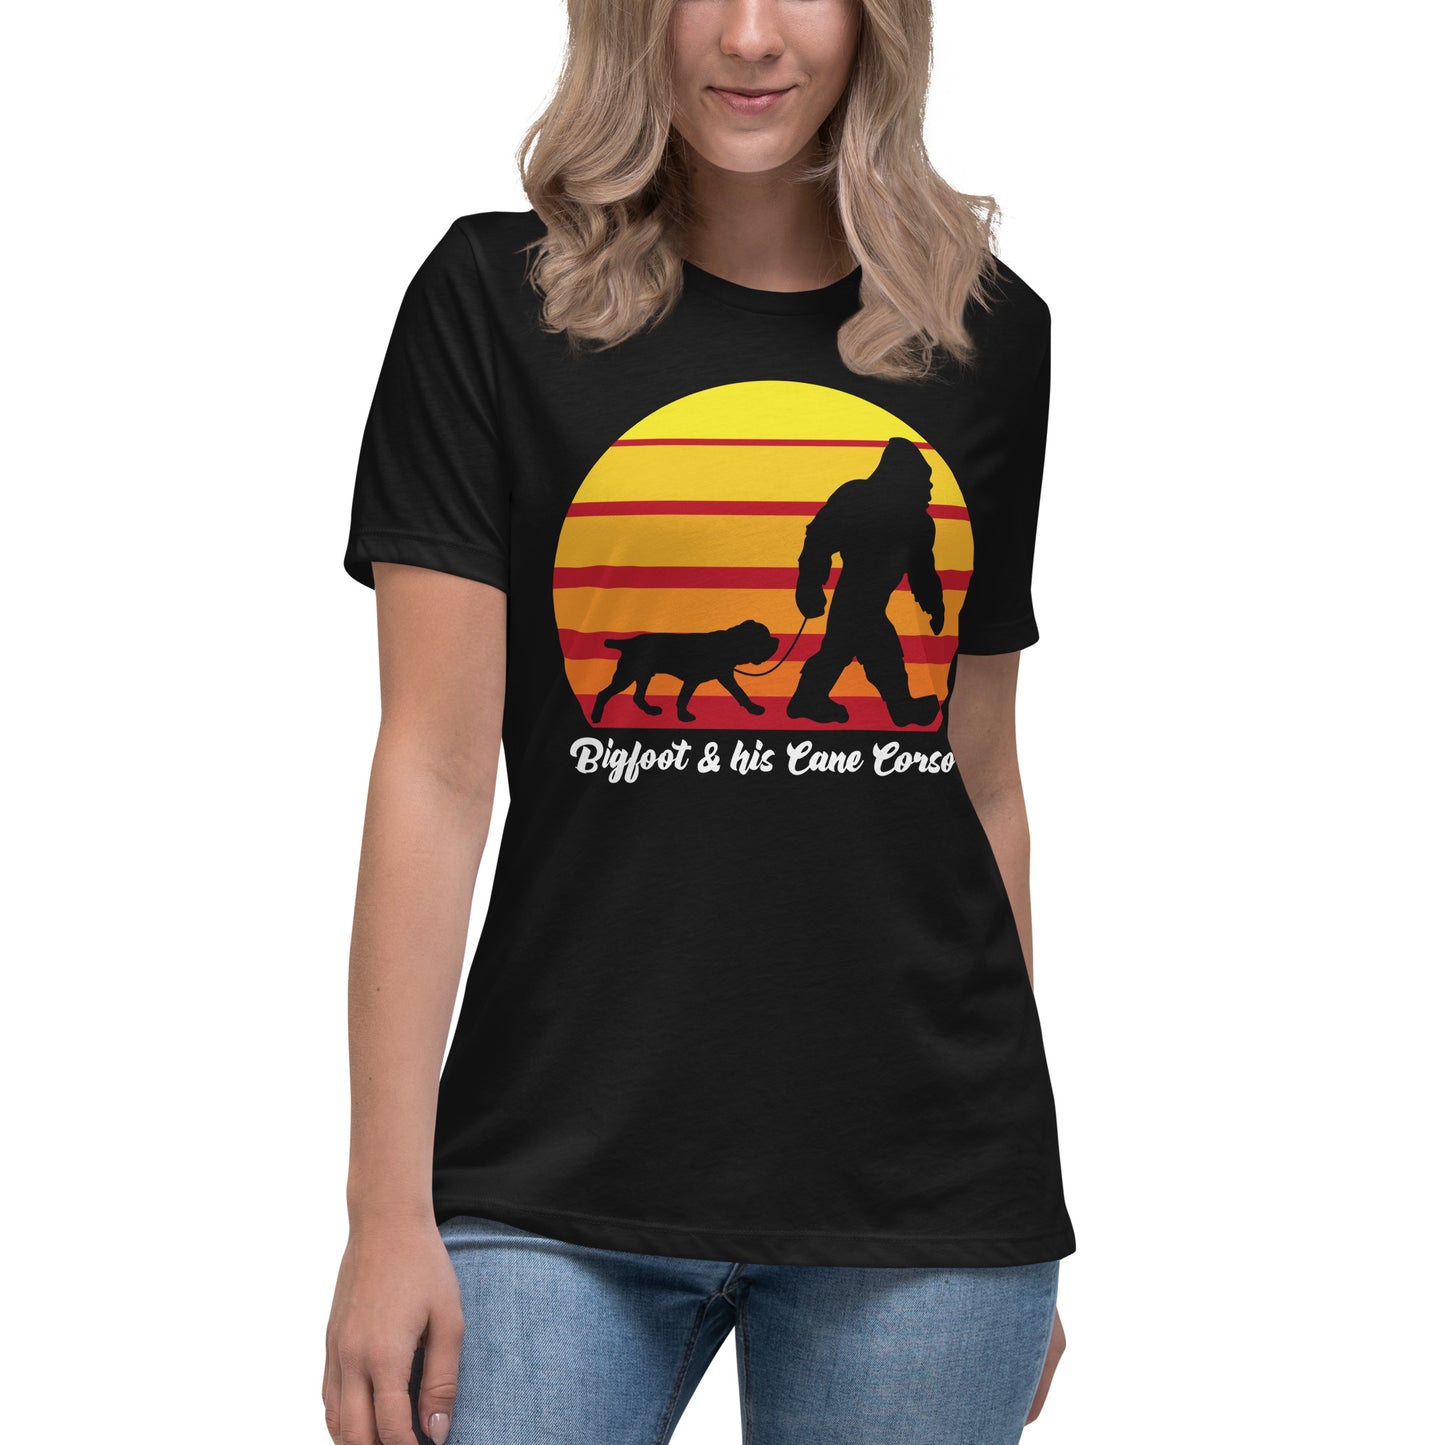 Big foot and his Cane Corso women’s black t-shirt by Dog Artistry.